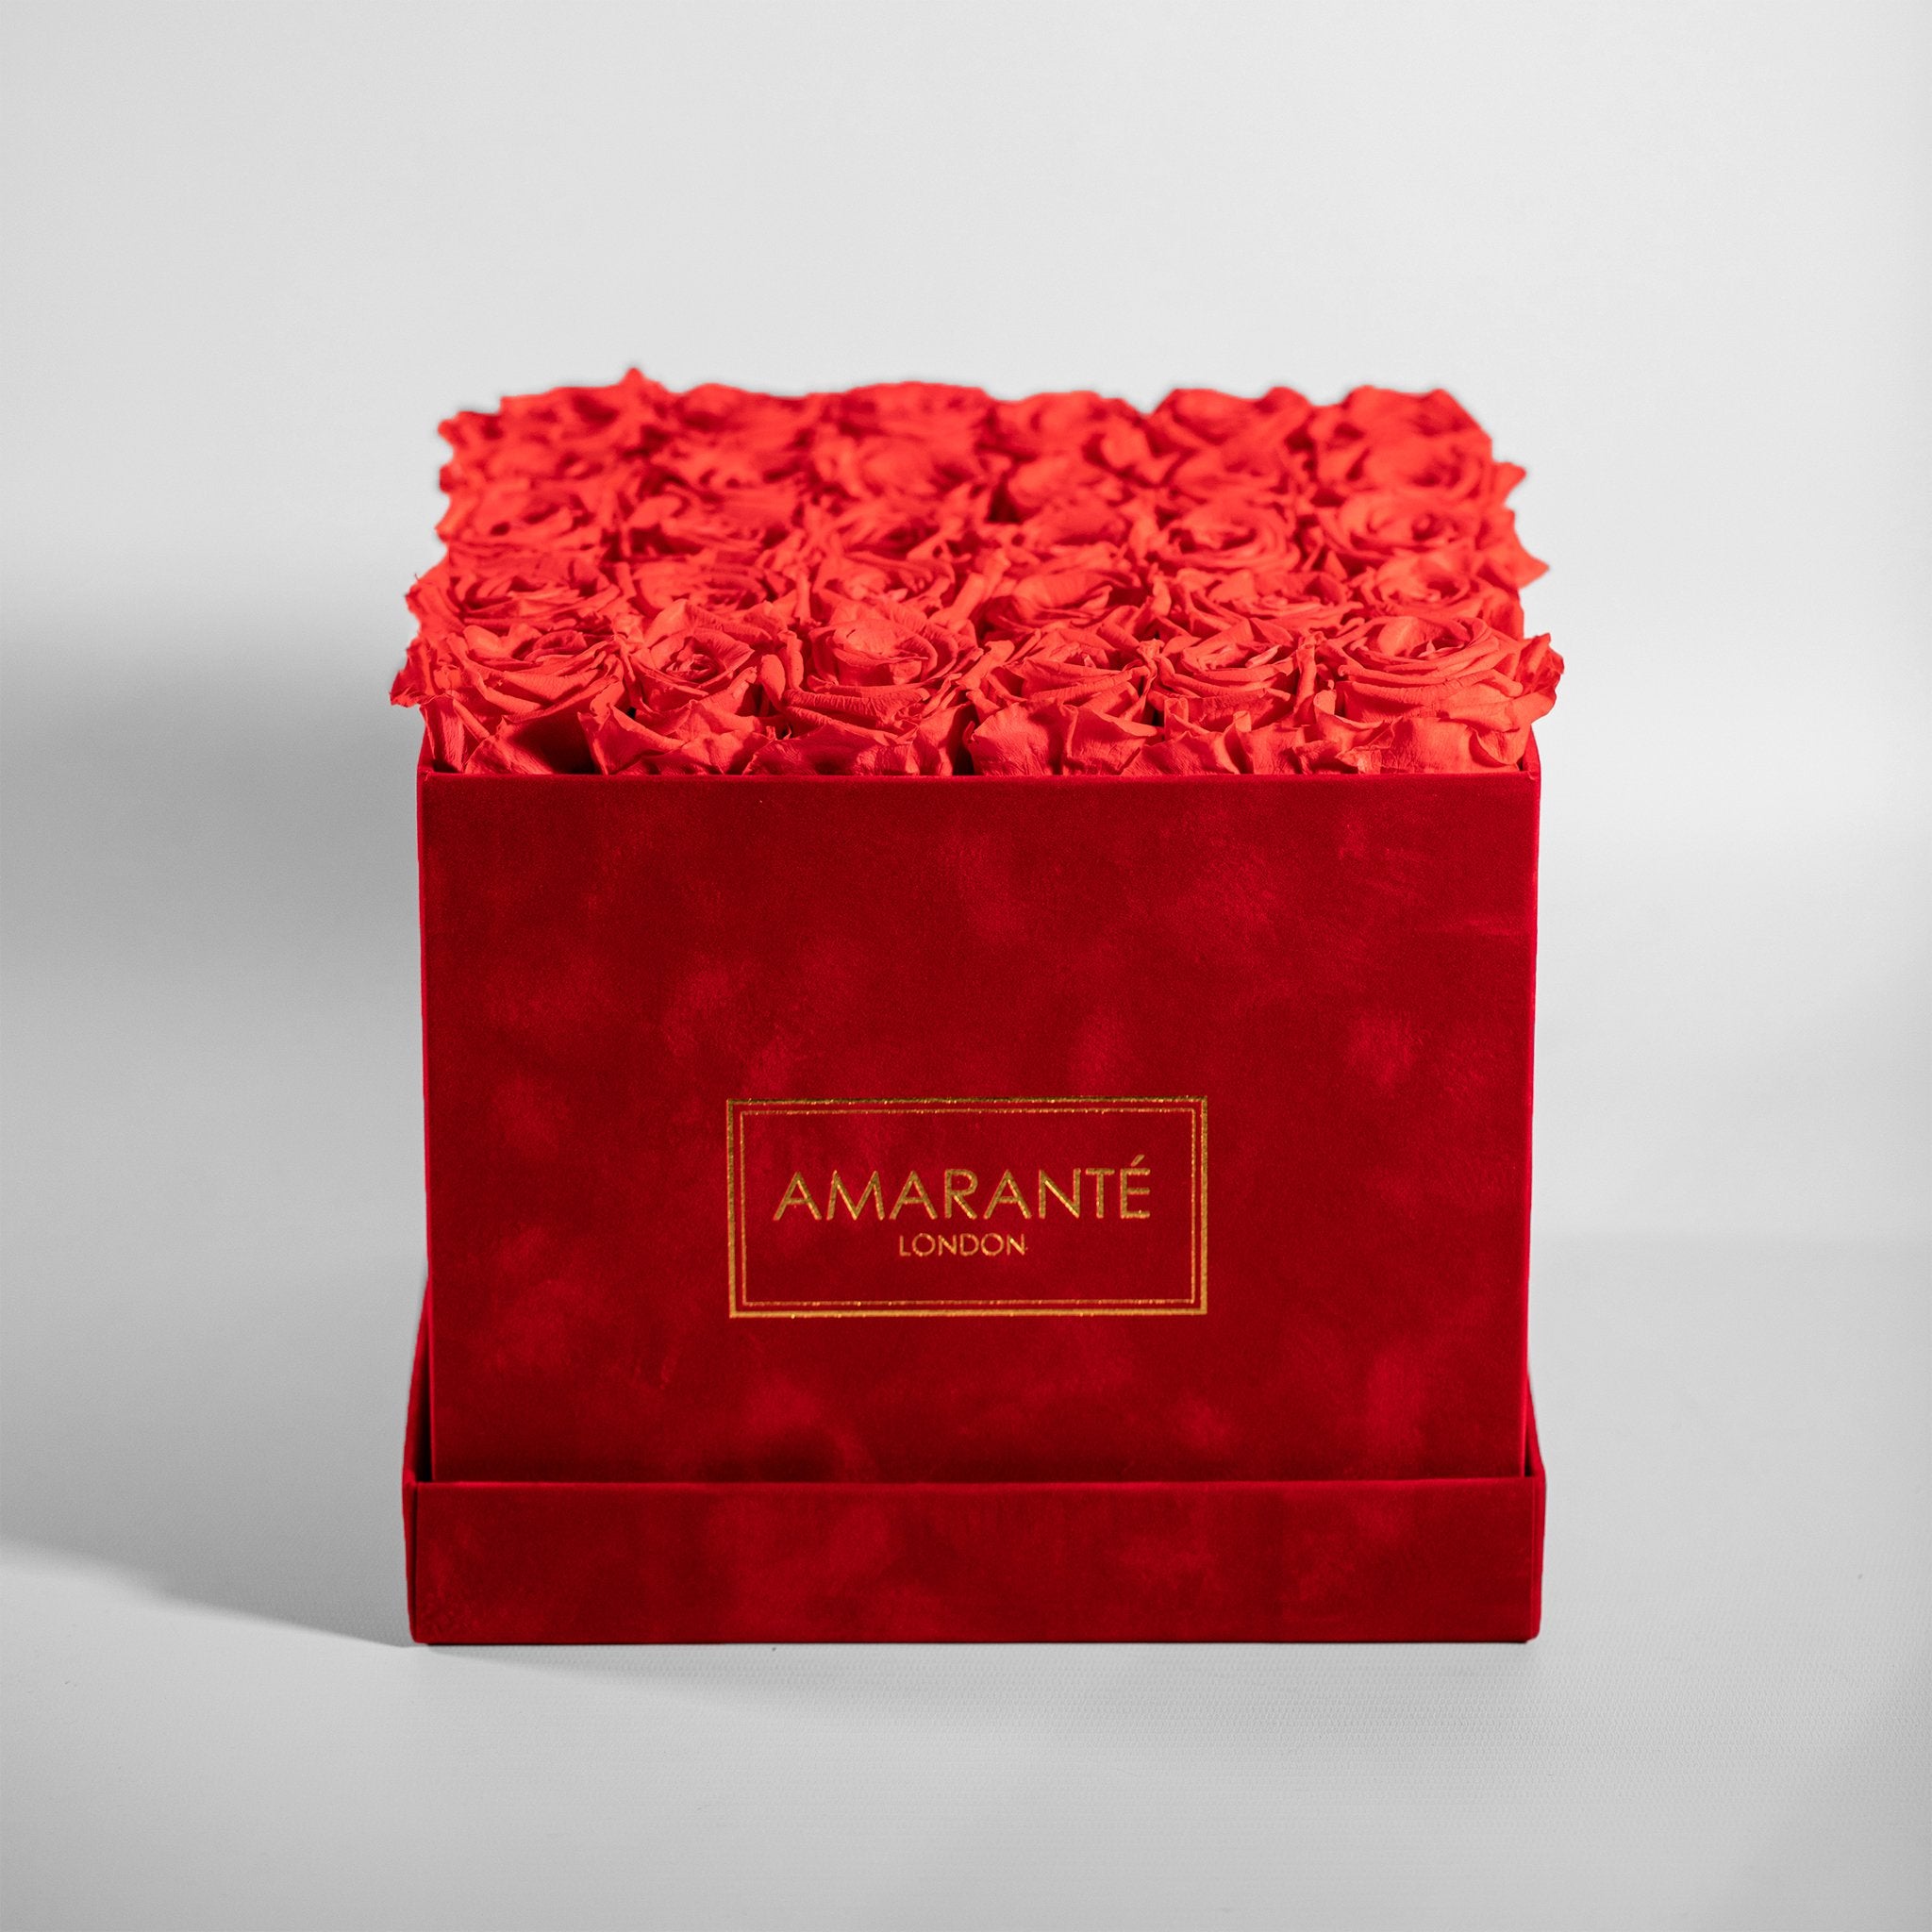 Elegant hot pink coloured Roses connoting love and beauty, featured in a large red box 